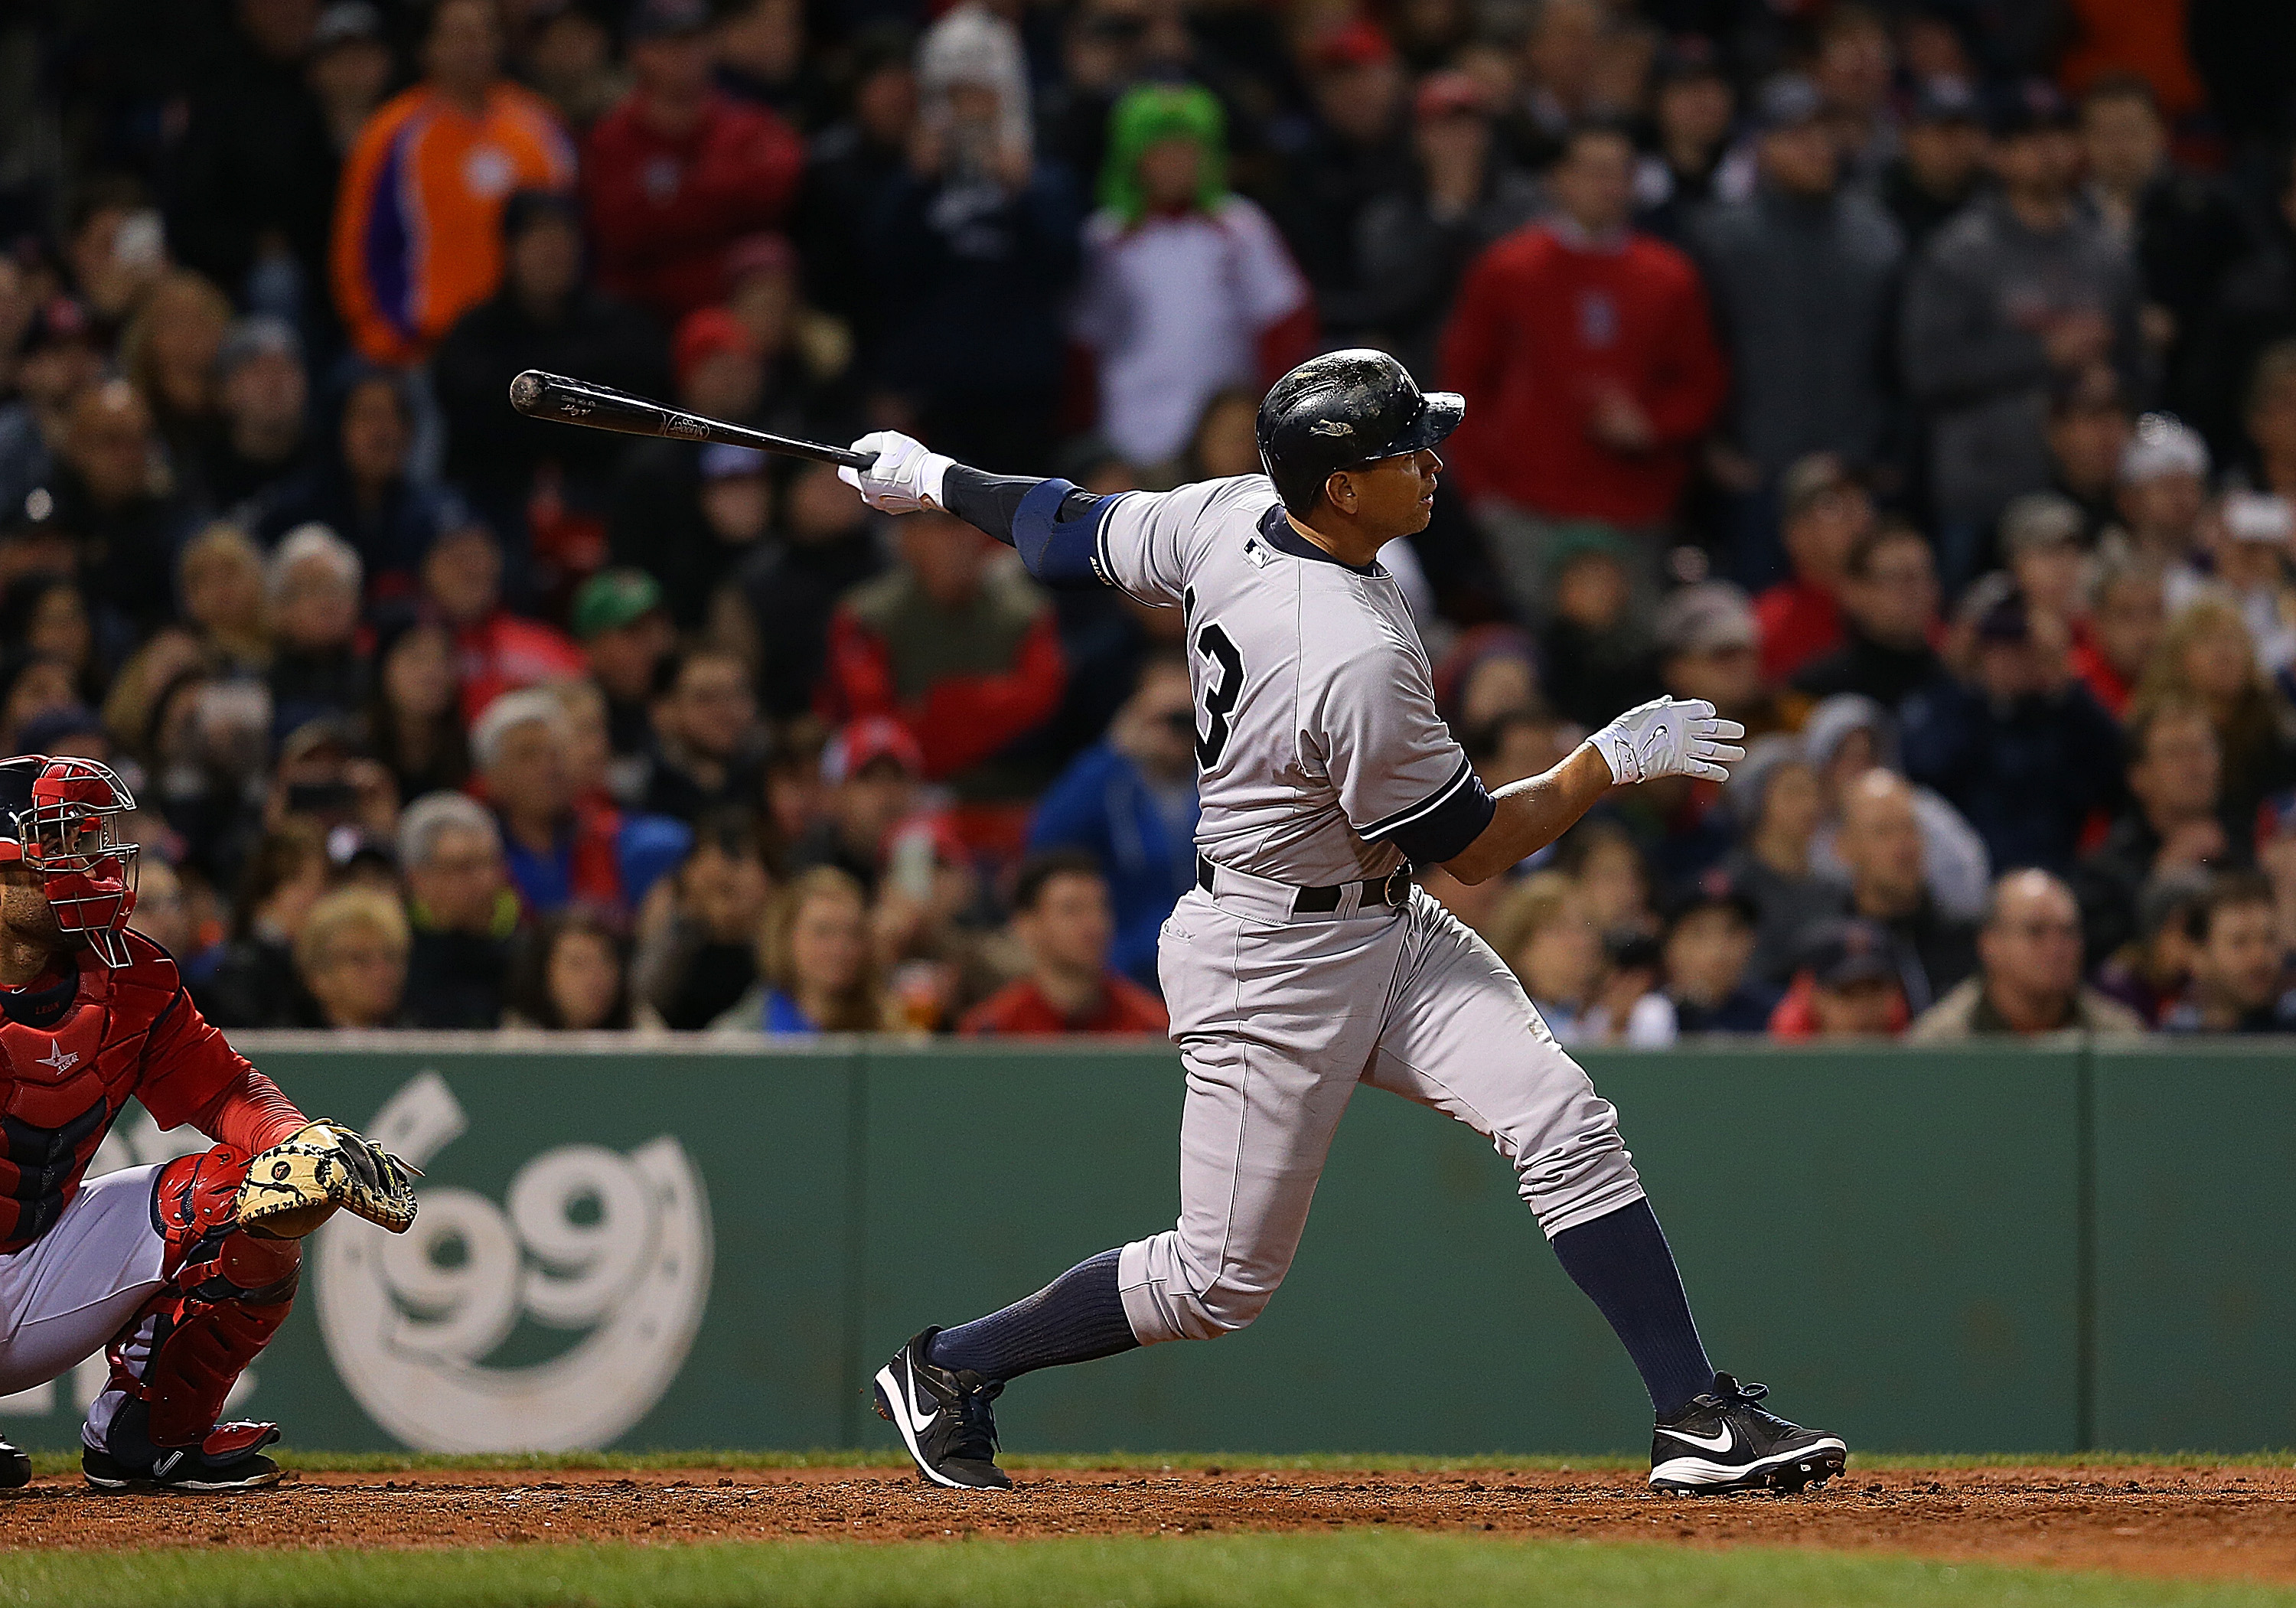 BOSTON, MA - MAY 1: Alex Rodriguez #13 hits 660th career home run to tie Willie Mays record during a game with Boston Red Sox in the 8th inning at Fenway Park May 1, 2015 in Boston, Massachusetts. (Photo by Jim Rogash/Getty Images)